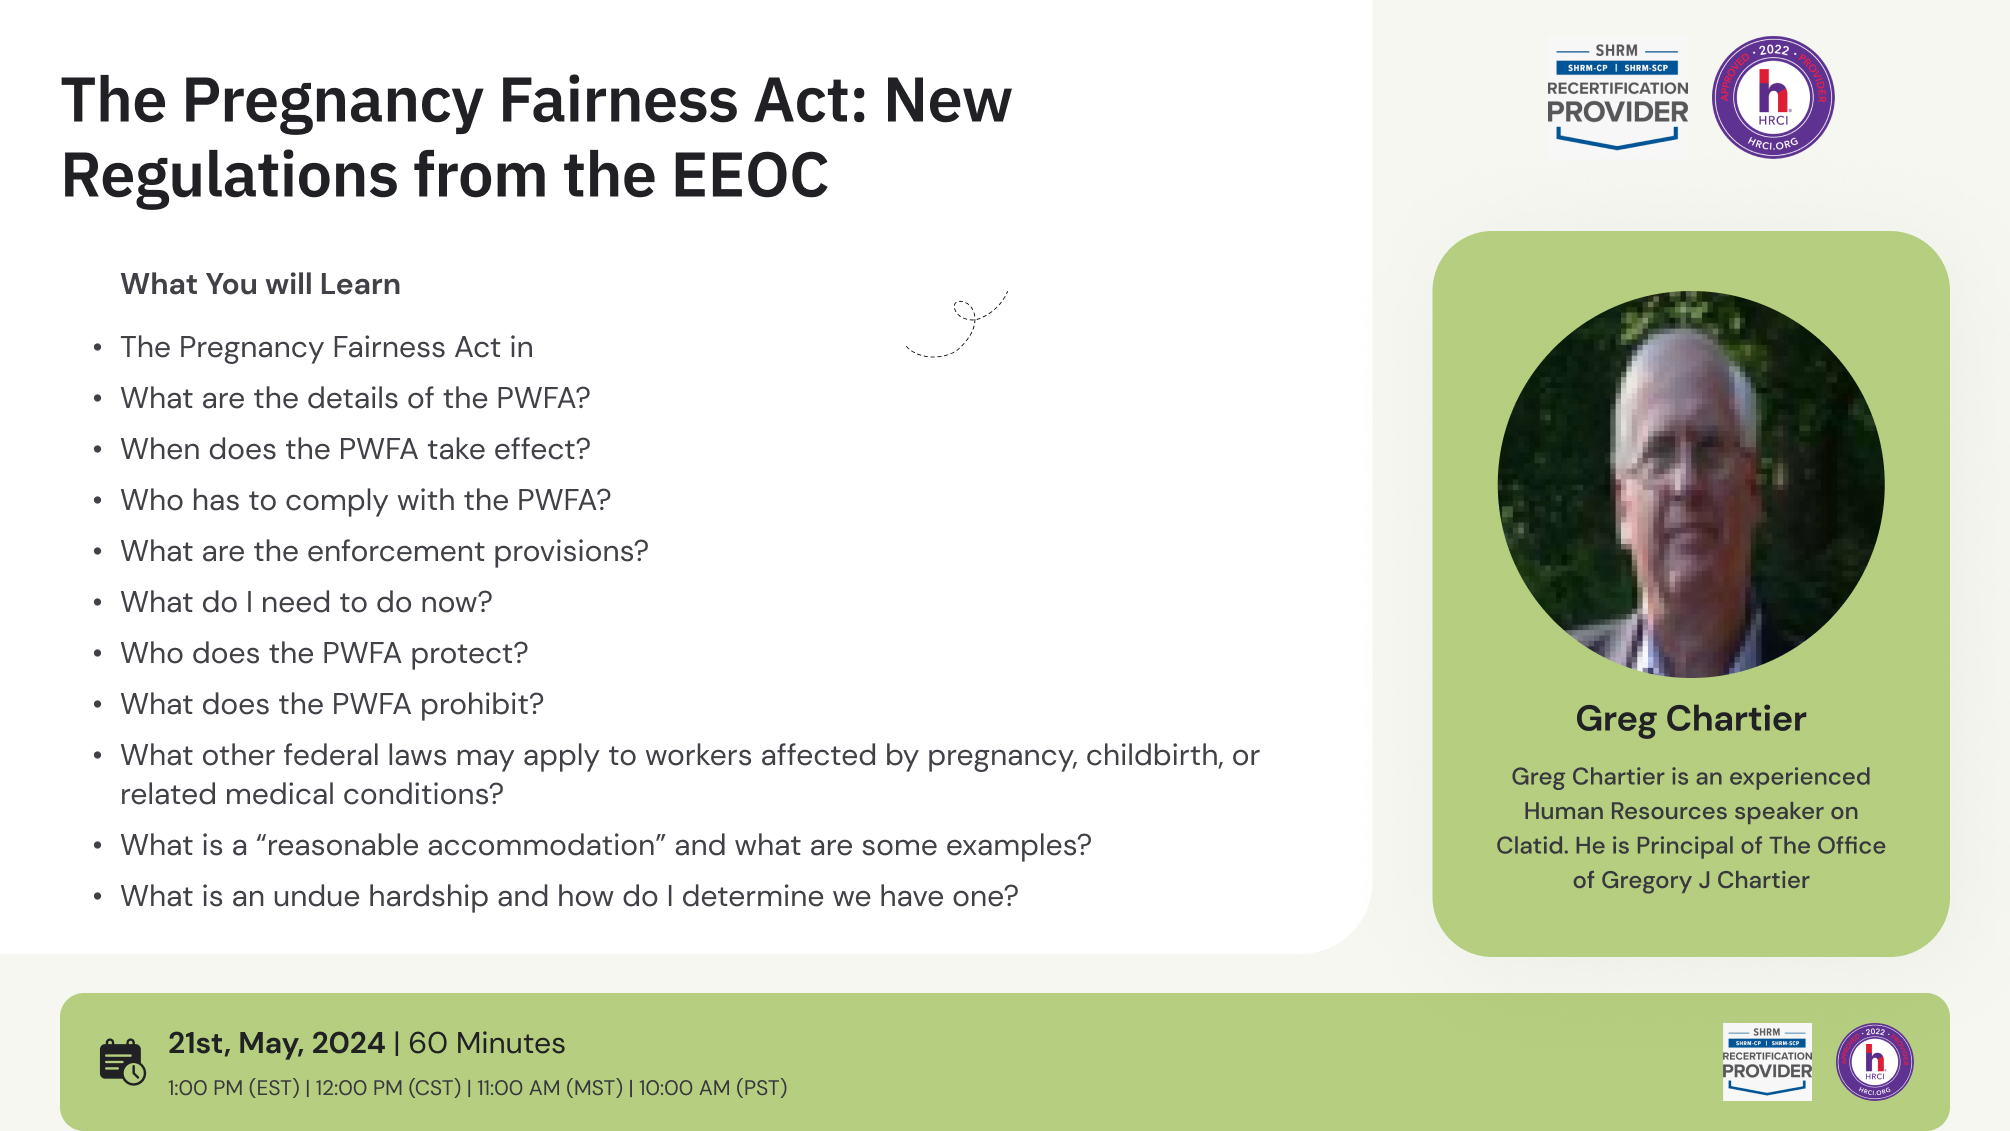 The Pregnancy Fairness Act: New Regulations from the EEOC